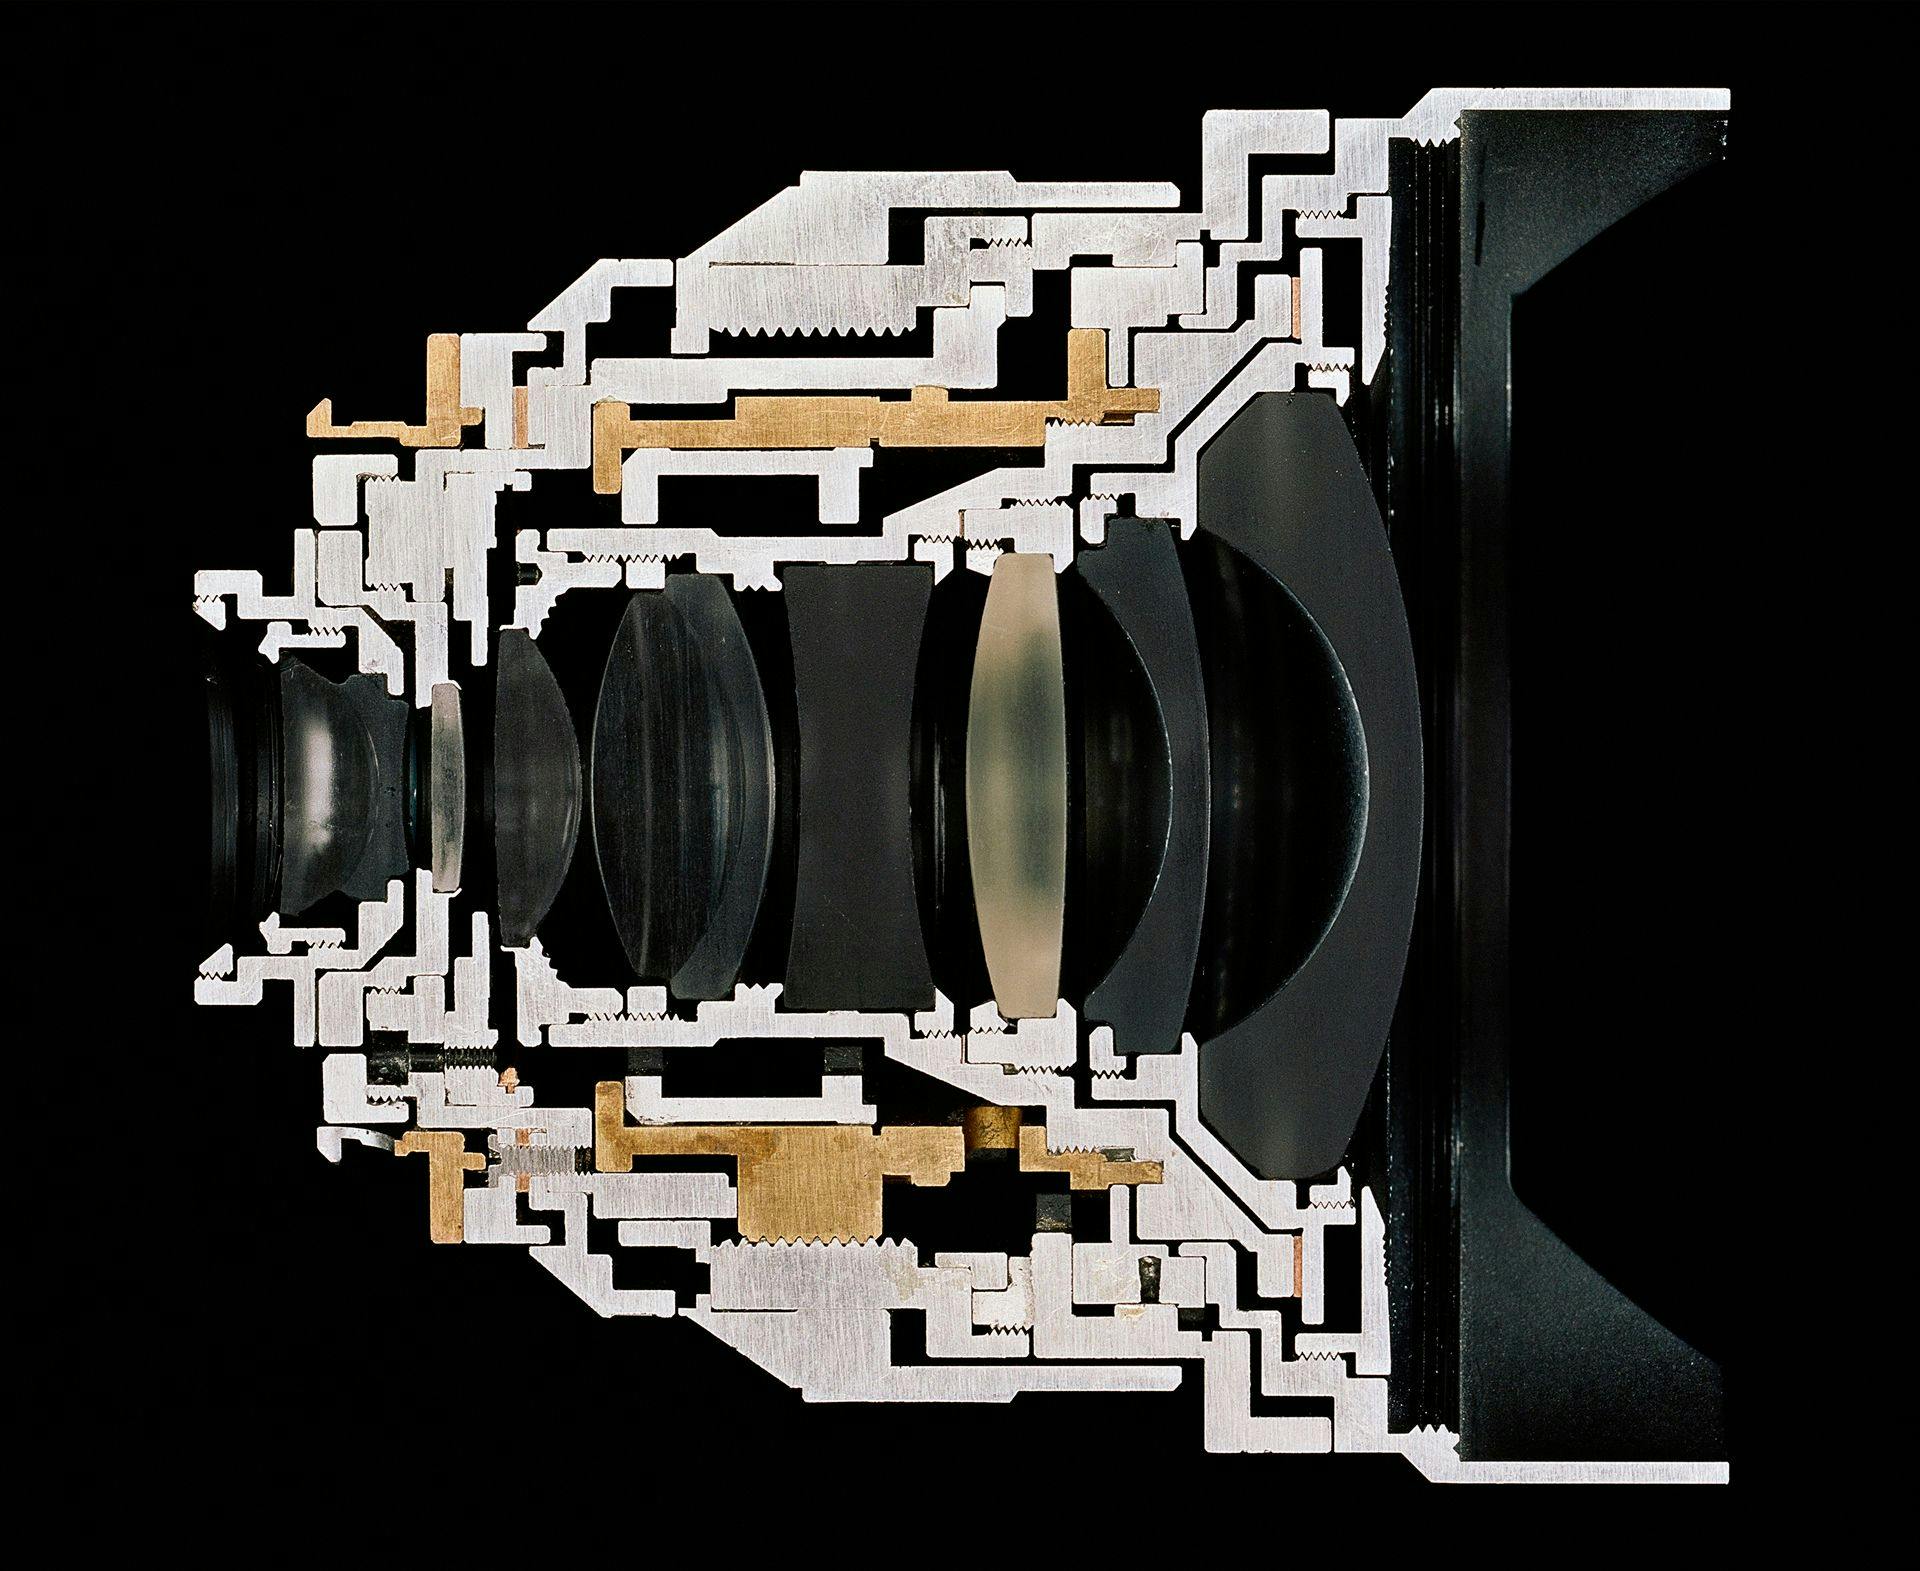 A photograph by Christopher Williams titled Cutaway model Zeiss Distagon T* 2.8/15 ZM‚Ä¶, dated 2013.